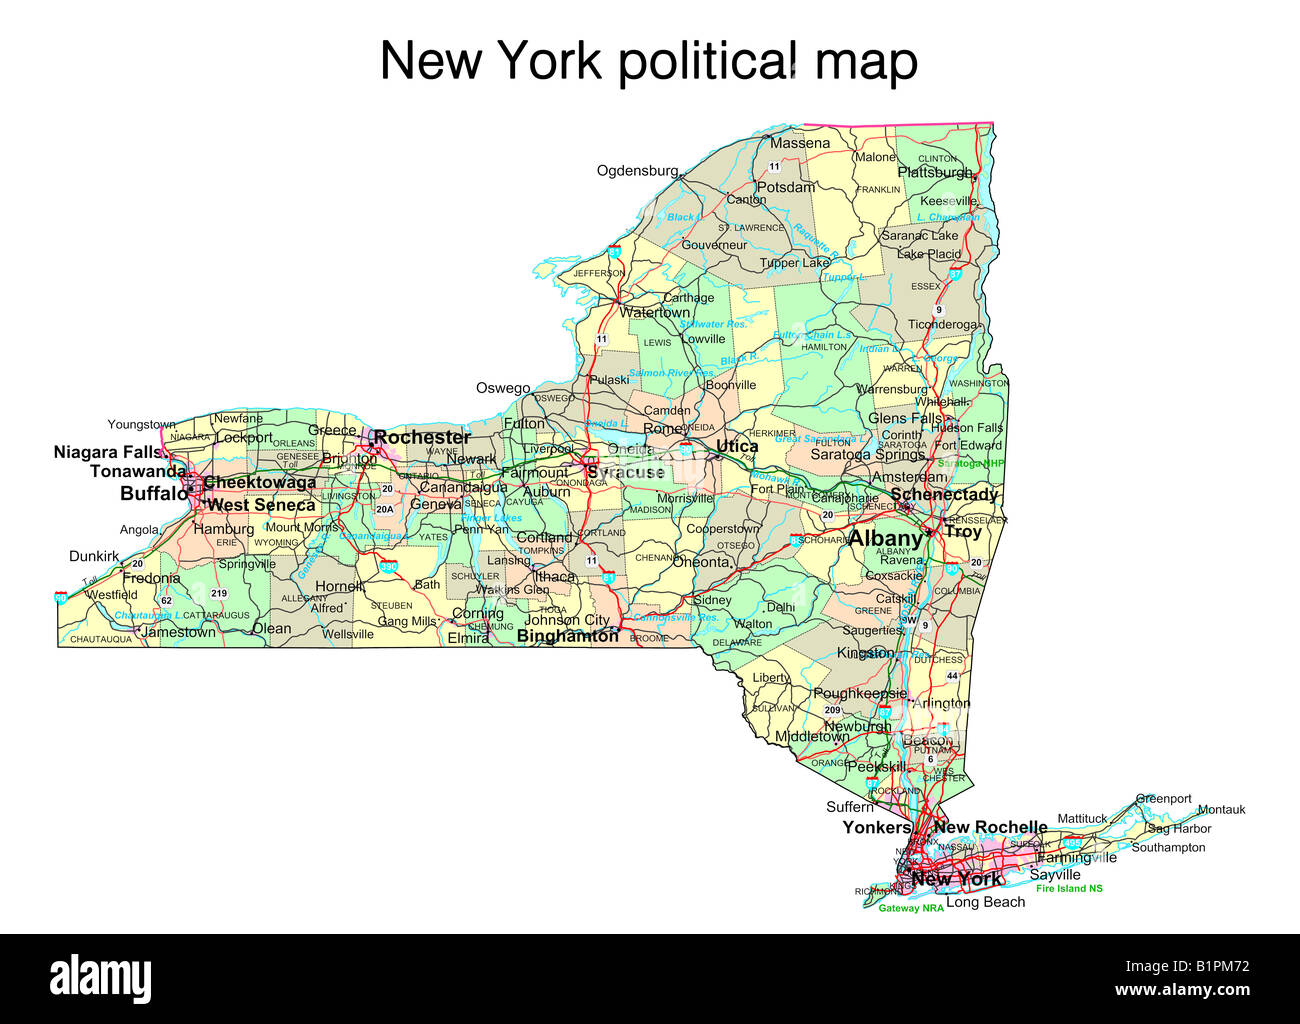 new york state political map New York State Political Map Stock Photo Alamy new york state political map